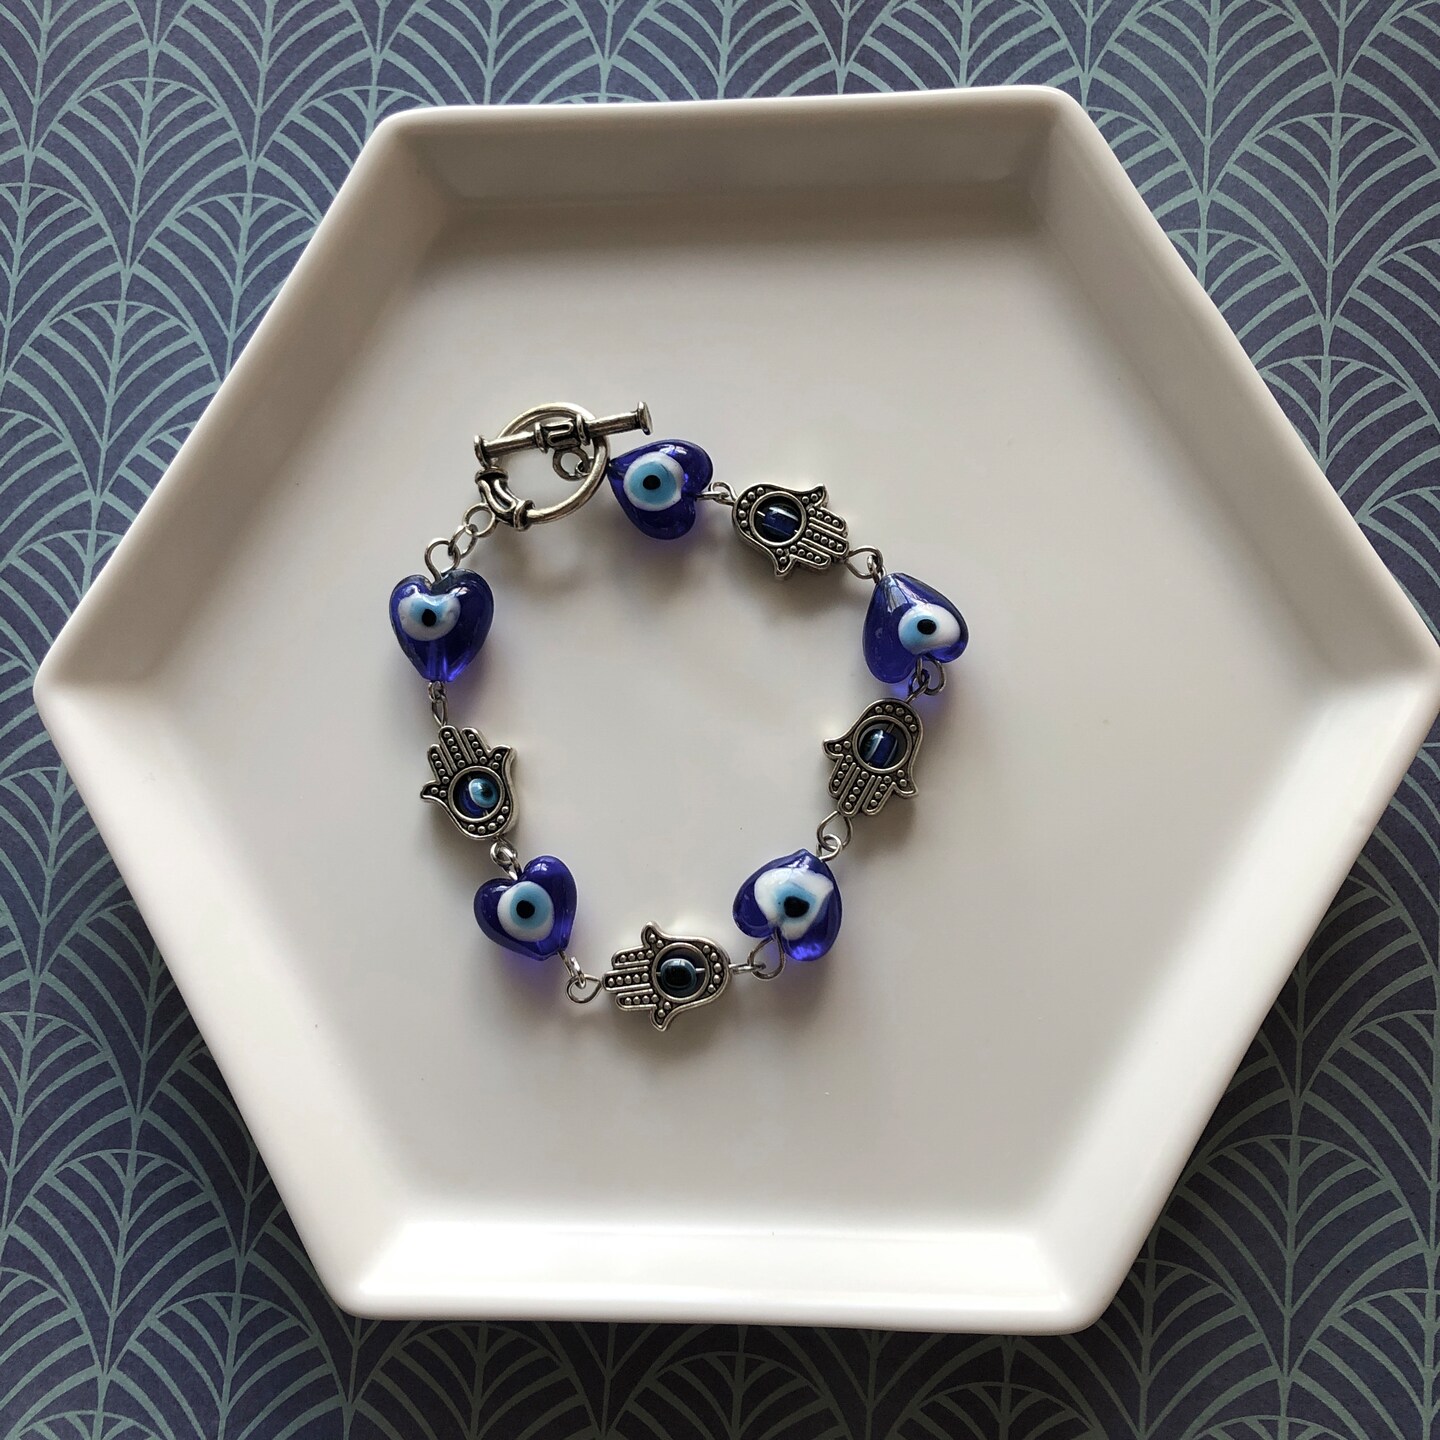 Cobalt Blue and Aventurina Authentic Murano Glass Beaded Bracelet 7.5  Inches with 1 1/4 Inch Extender, Gold Tone Clasp and Murano Tag